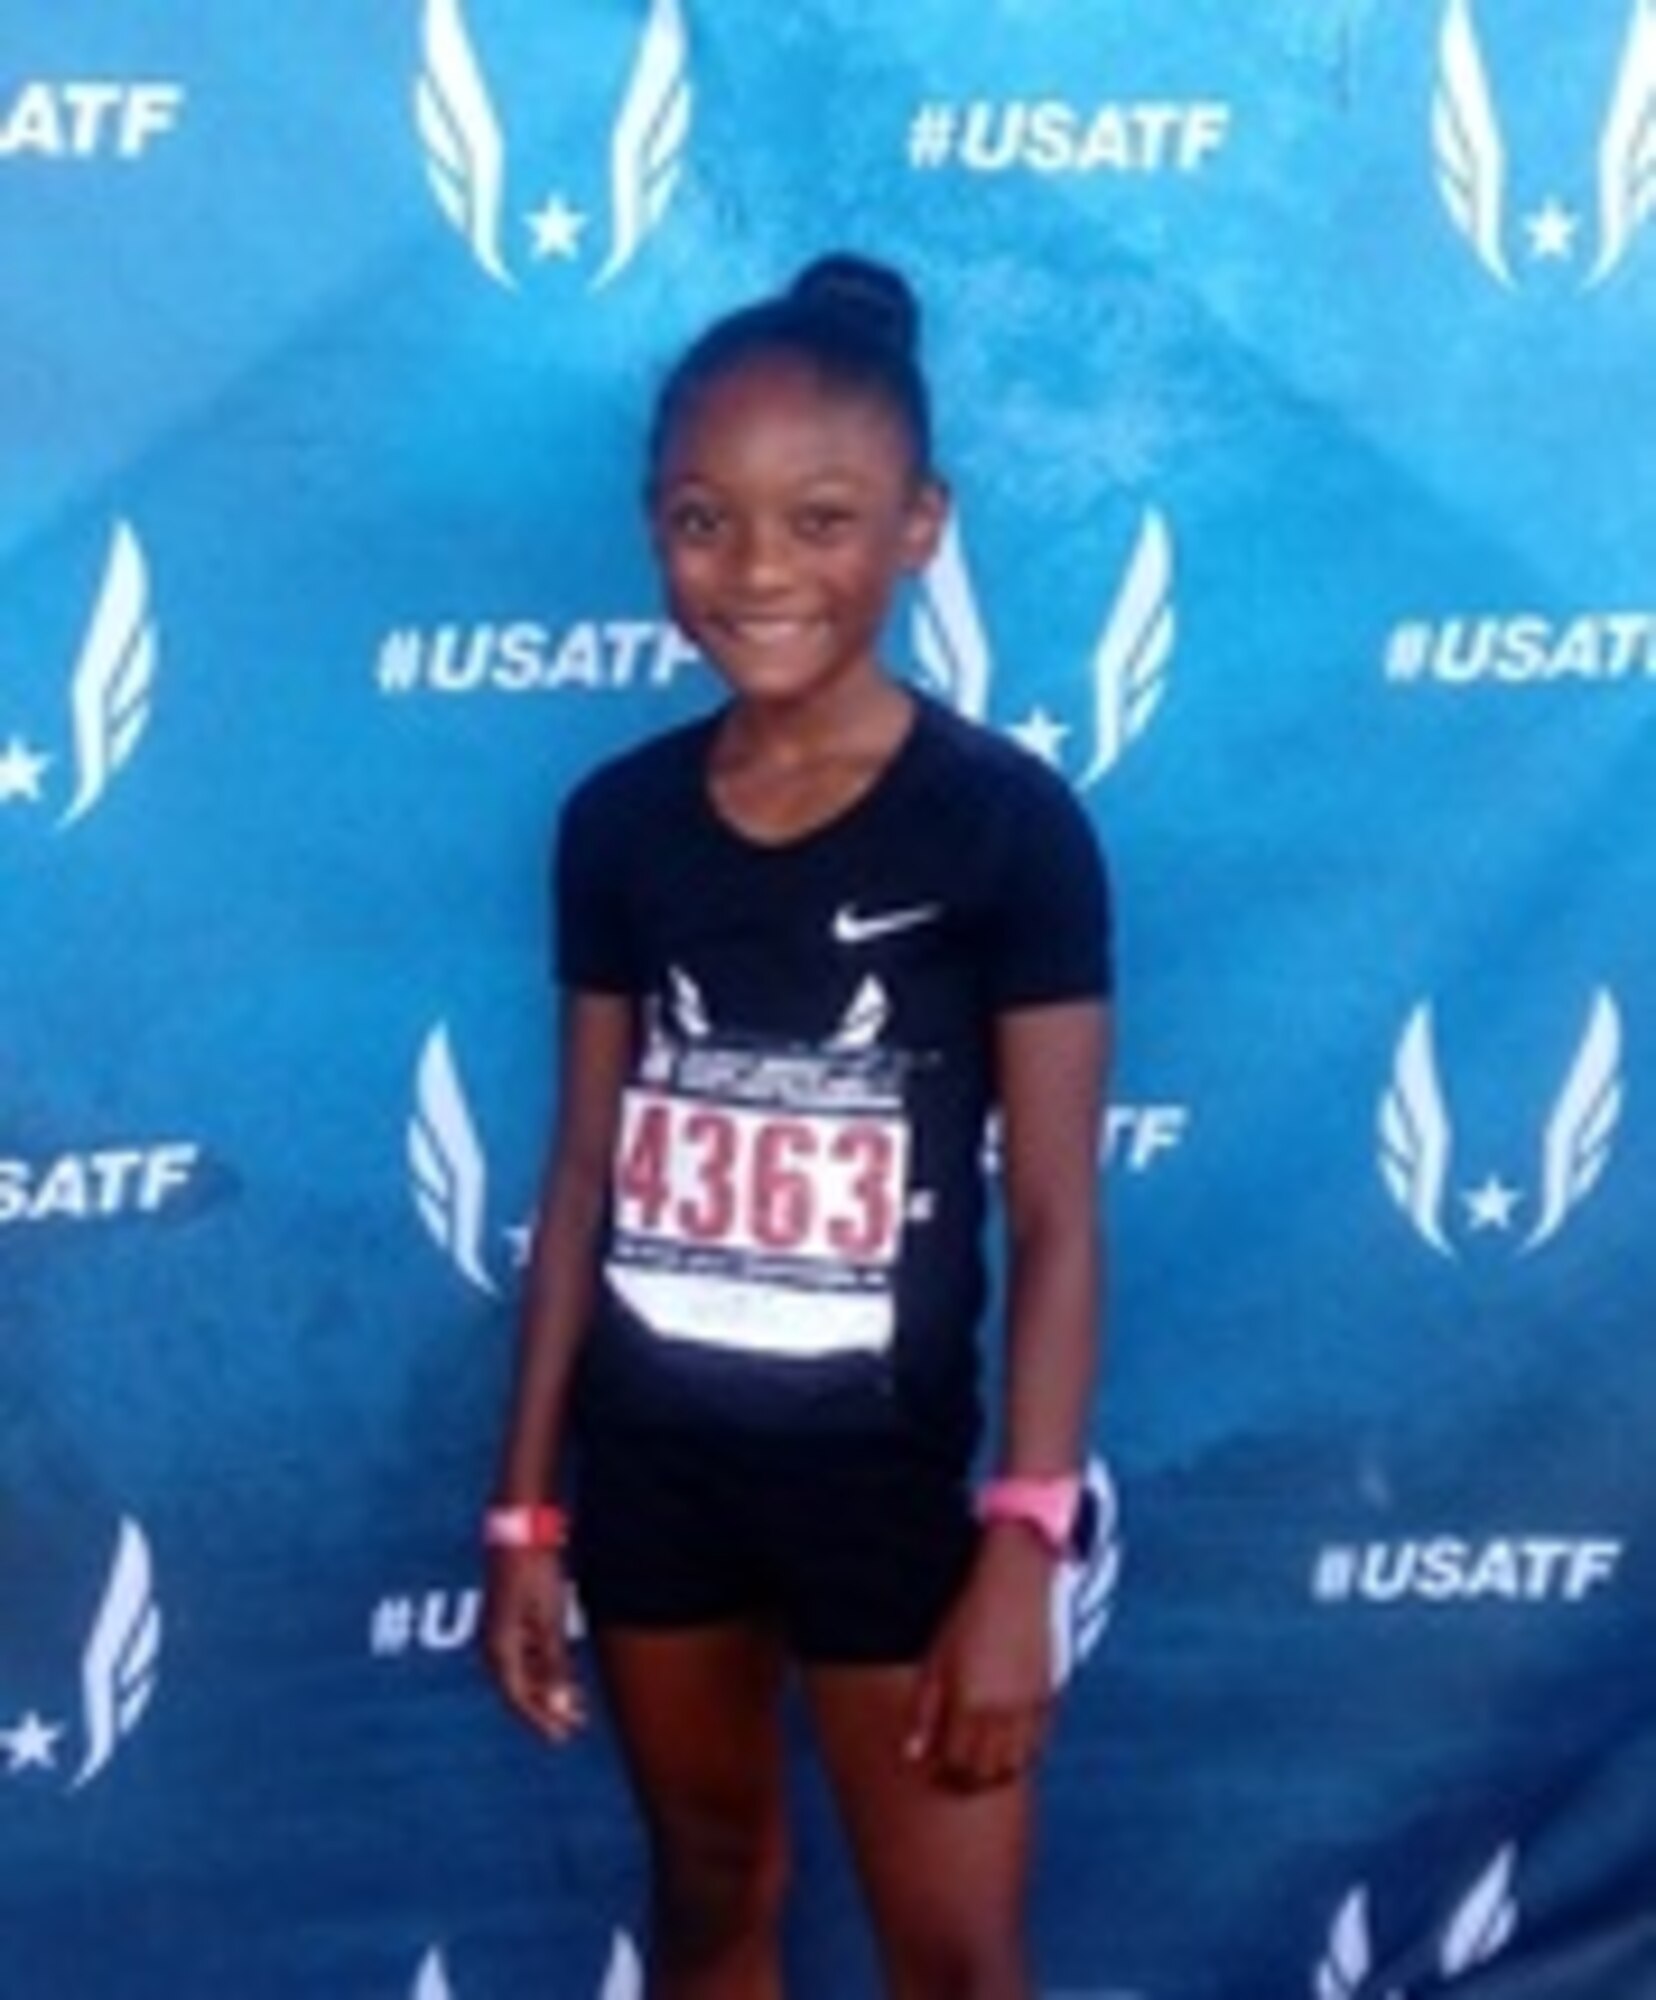 Jaiya Patillo, a Junior Olympian, poses for a photof at the 2018 USA Track & Field National Junior Olympics July 2018, at Greensboro, North Carolina. Patillo does much of her trtaining at Offutt Air Force Base. As of Sept. 21, 2018, her personal best times in her race categories were 14.32 seconds in the 100-meter, 28.53 seconds in the 200-meter, and 64.56 seconds in the 400-meter. (Courtesy Photo)